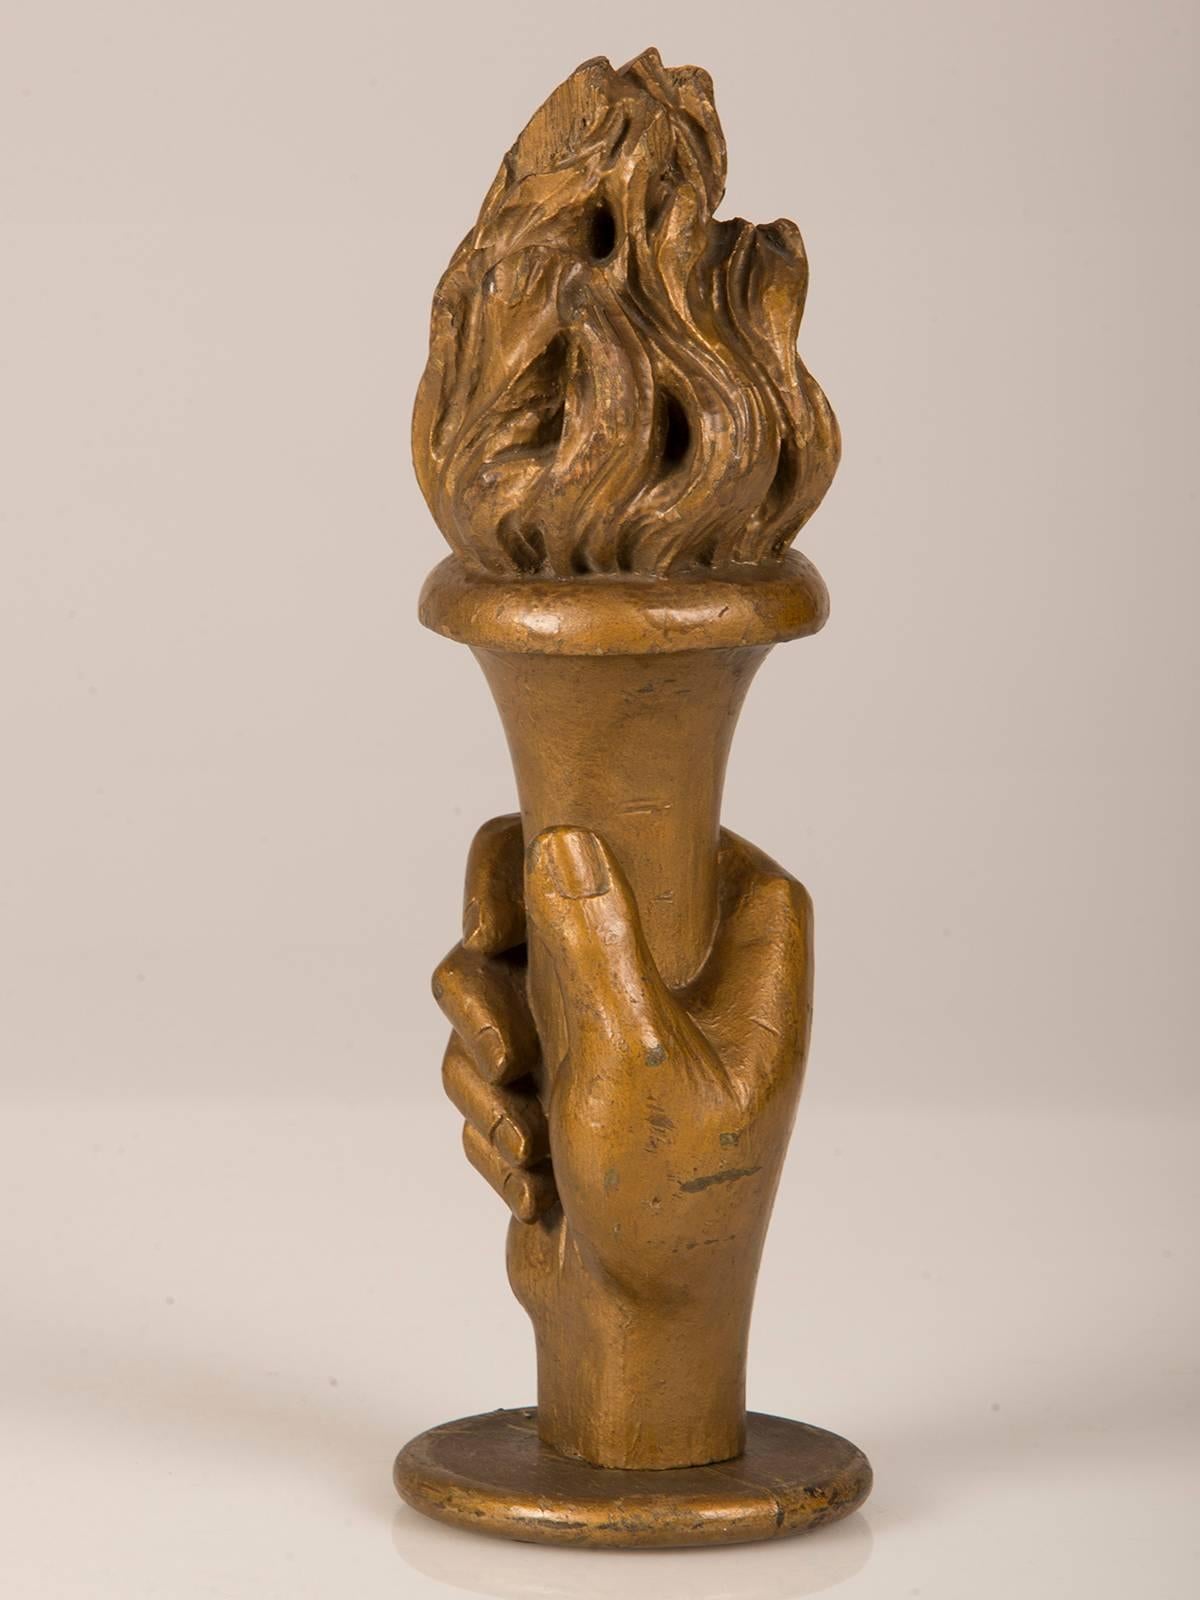 Hand-Carved Antique French Carved and Gilded Wood Sculpture, circa 1885